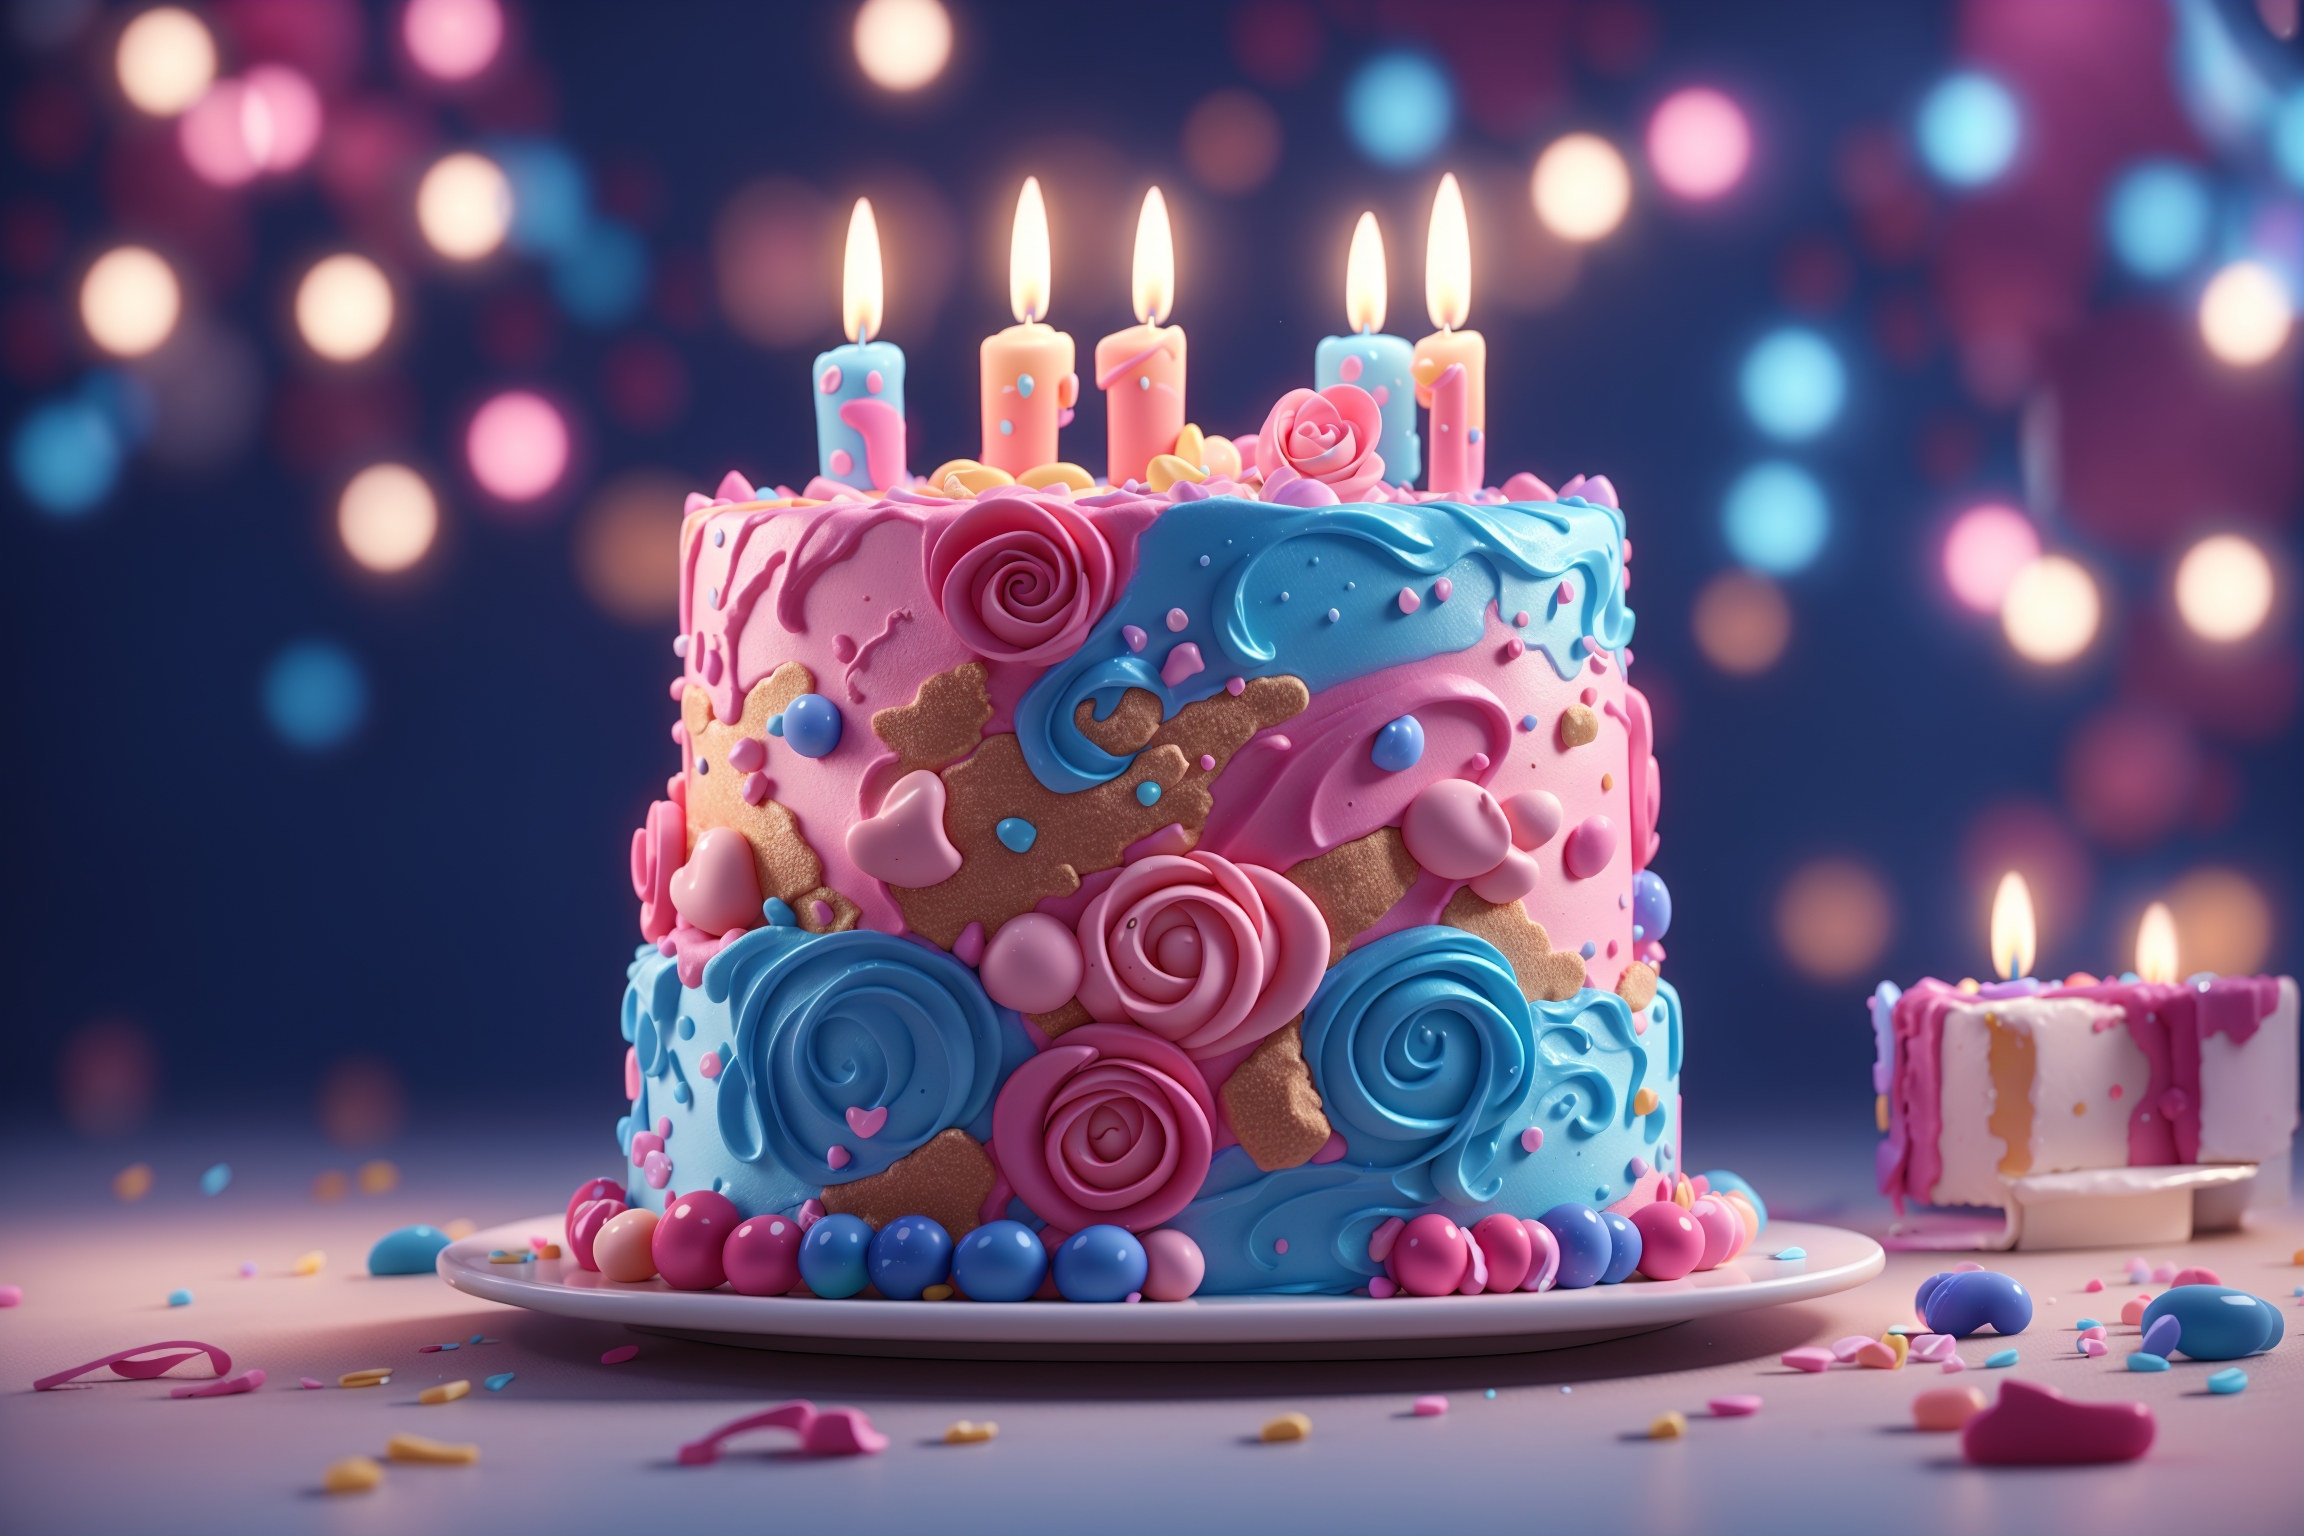 95 100 Birthday Cake Stock Video Footage - 4K and HD Video Clips |  Shutterstock